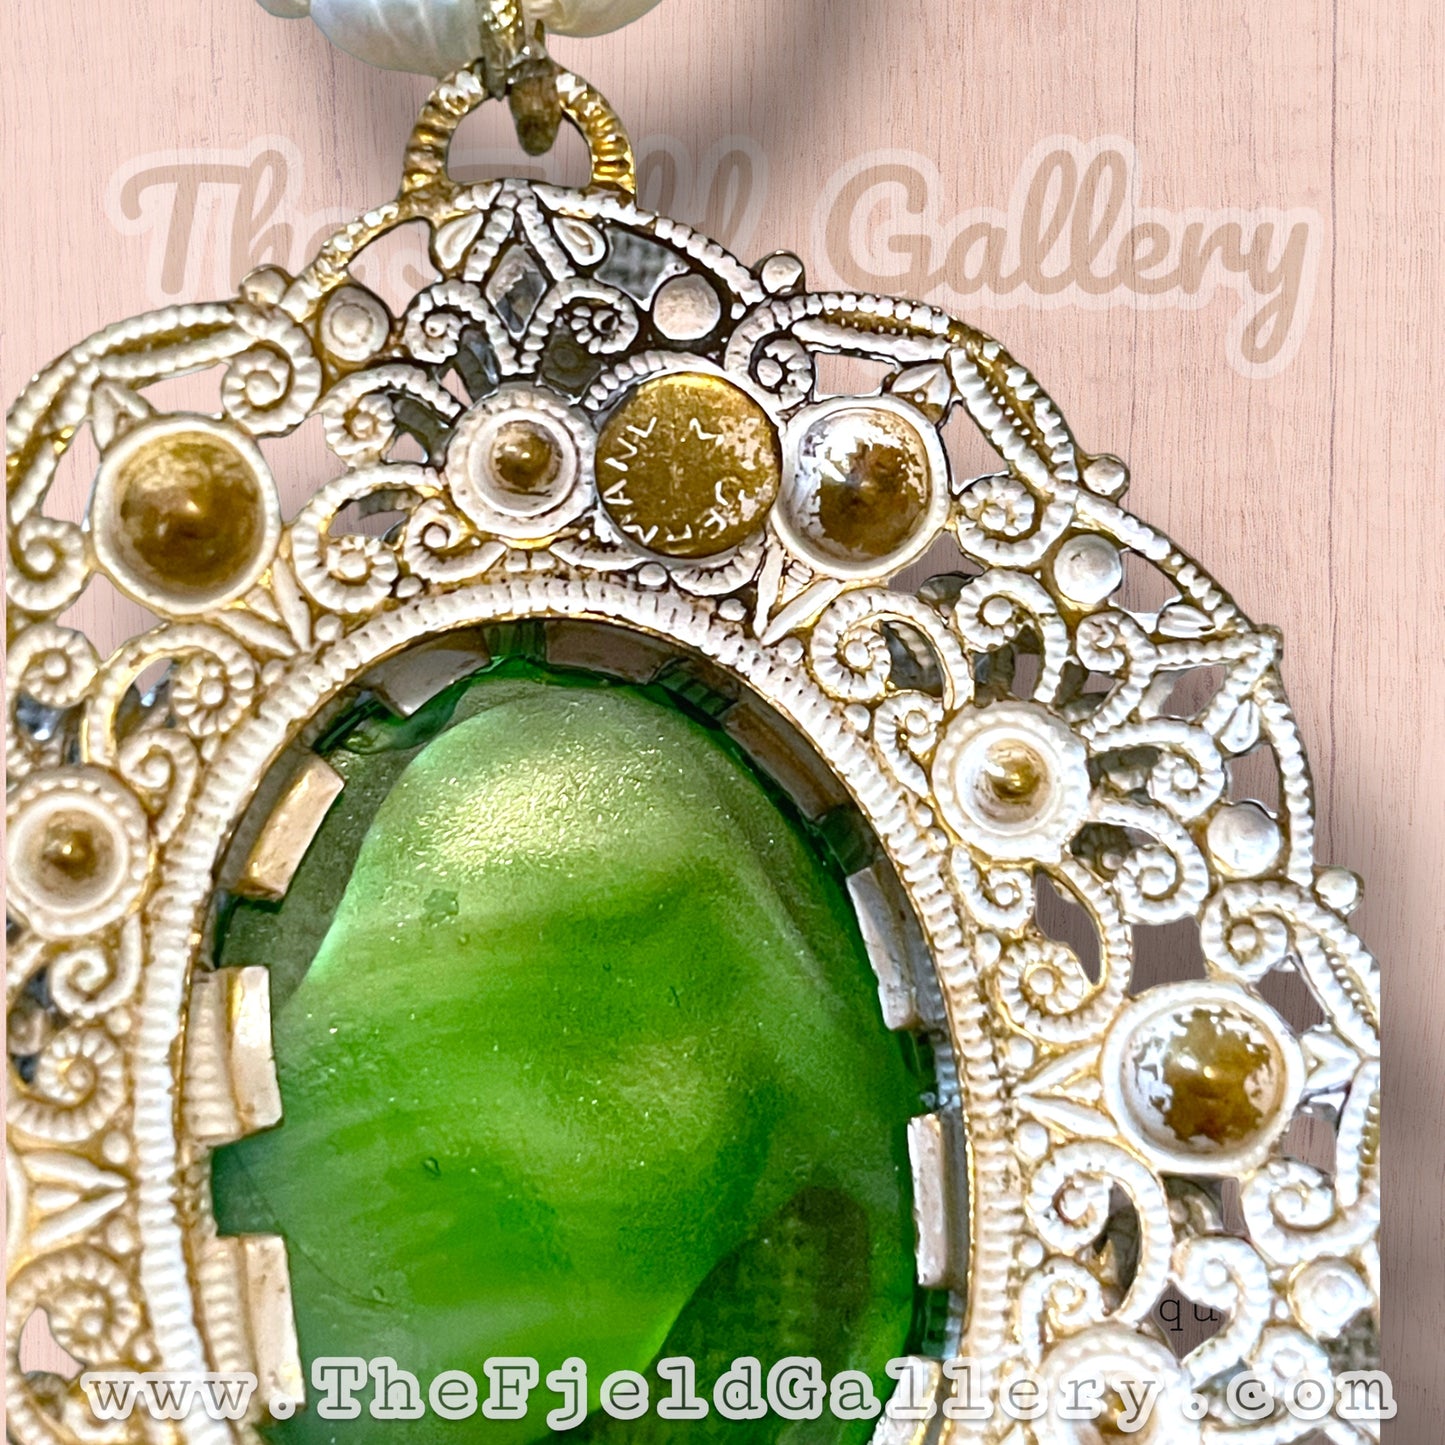 West German Green Marbled Art Glass in White Enamel Brass Filigree Setting Pendant on Natural Pearl Necklace